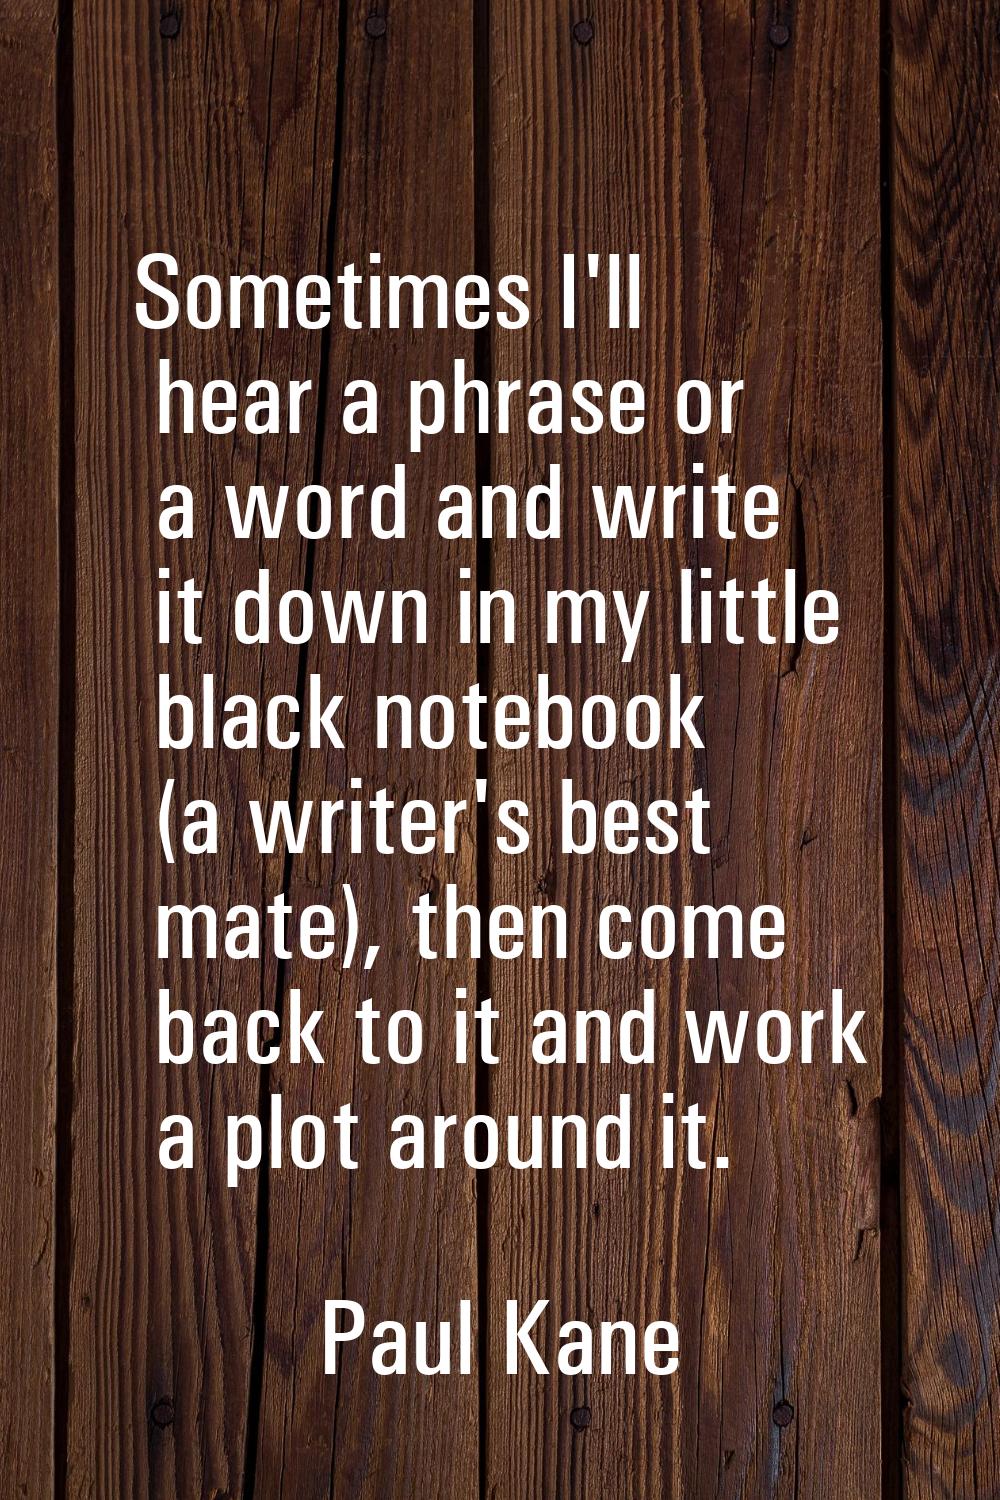 Sometimes I'll hear a phrase or a word and write it down in my little black notebook (a writer's be